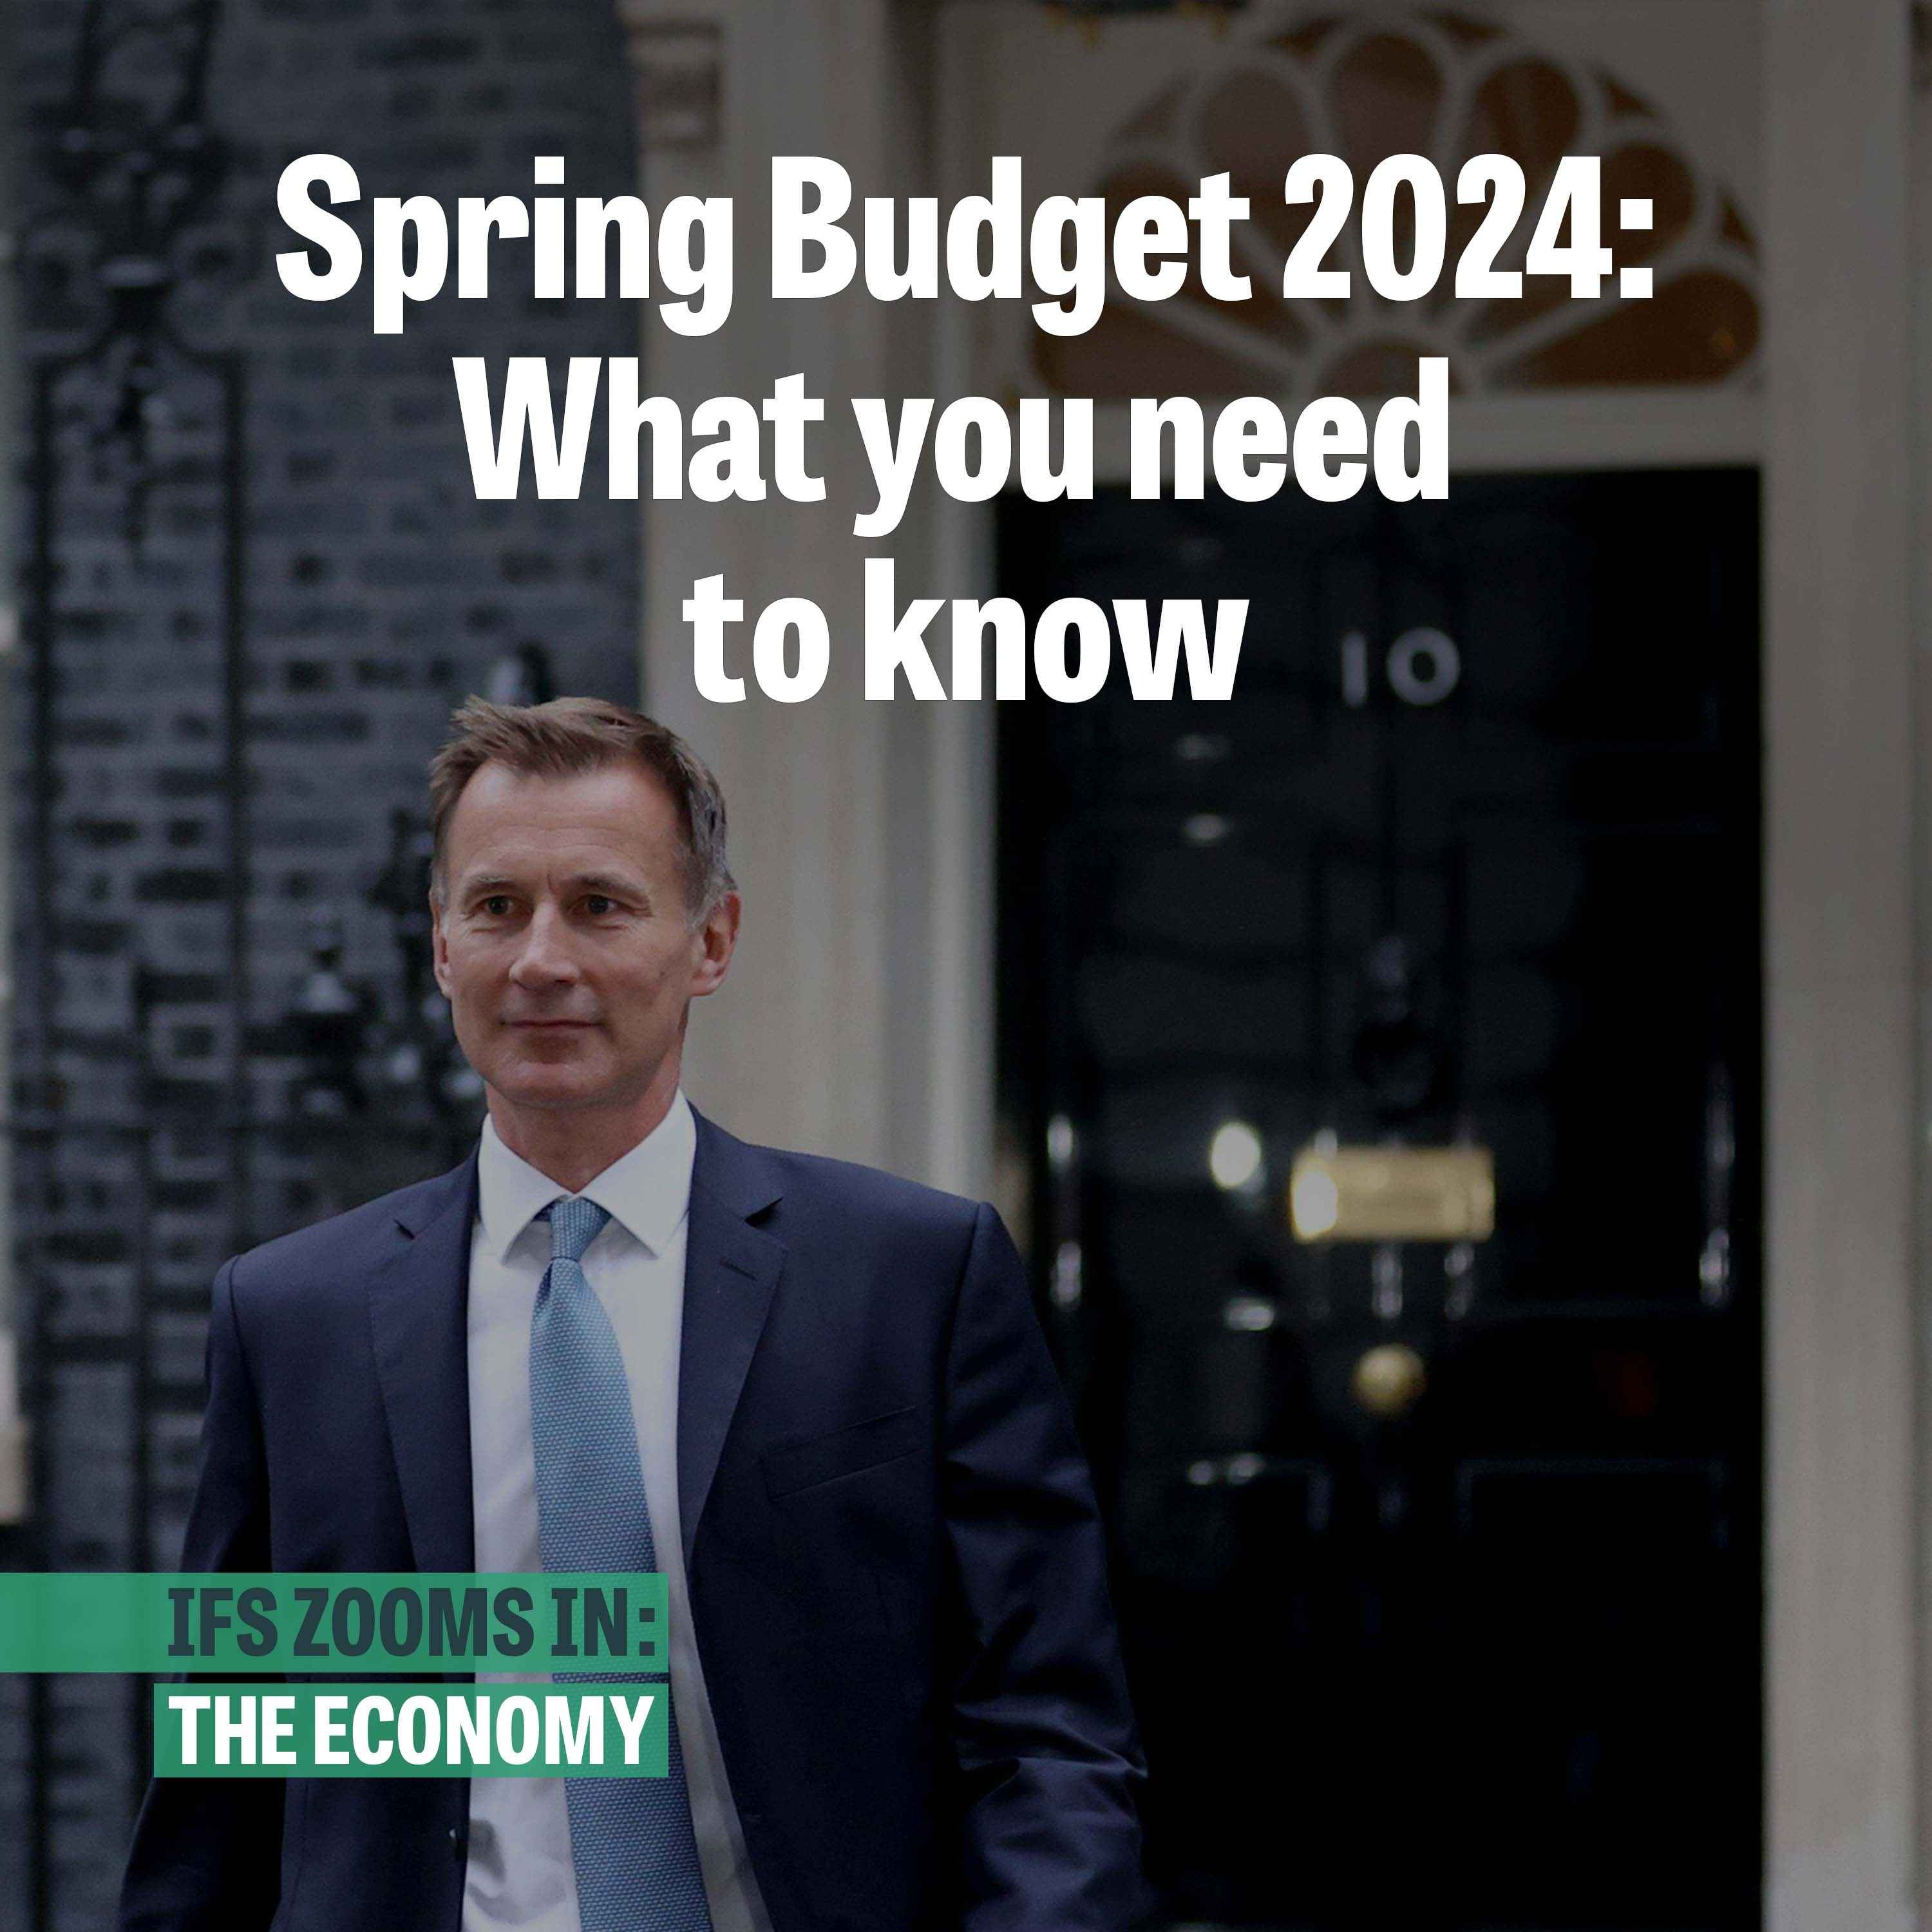 Spring Budget 2024: What you need to know